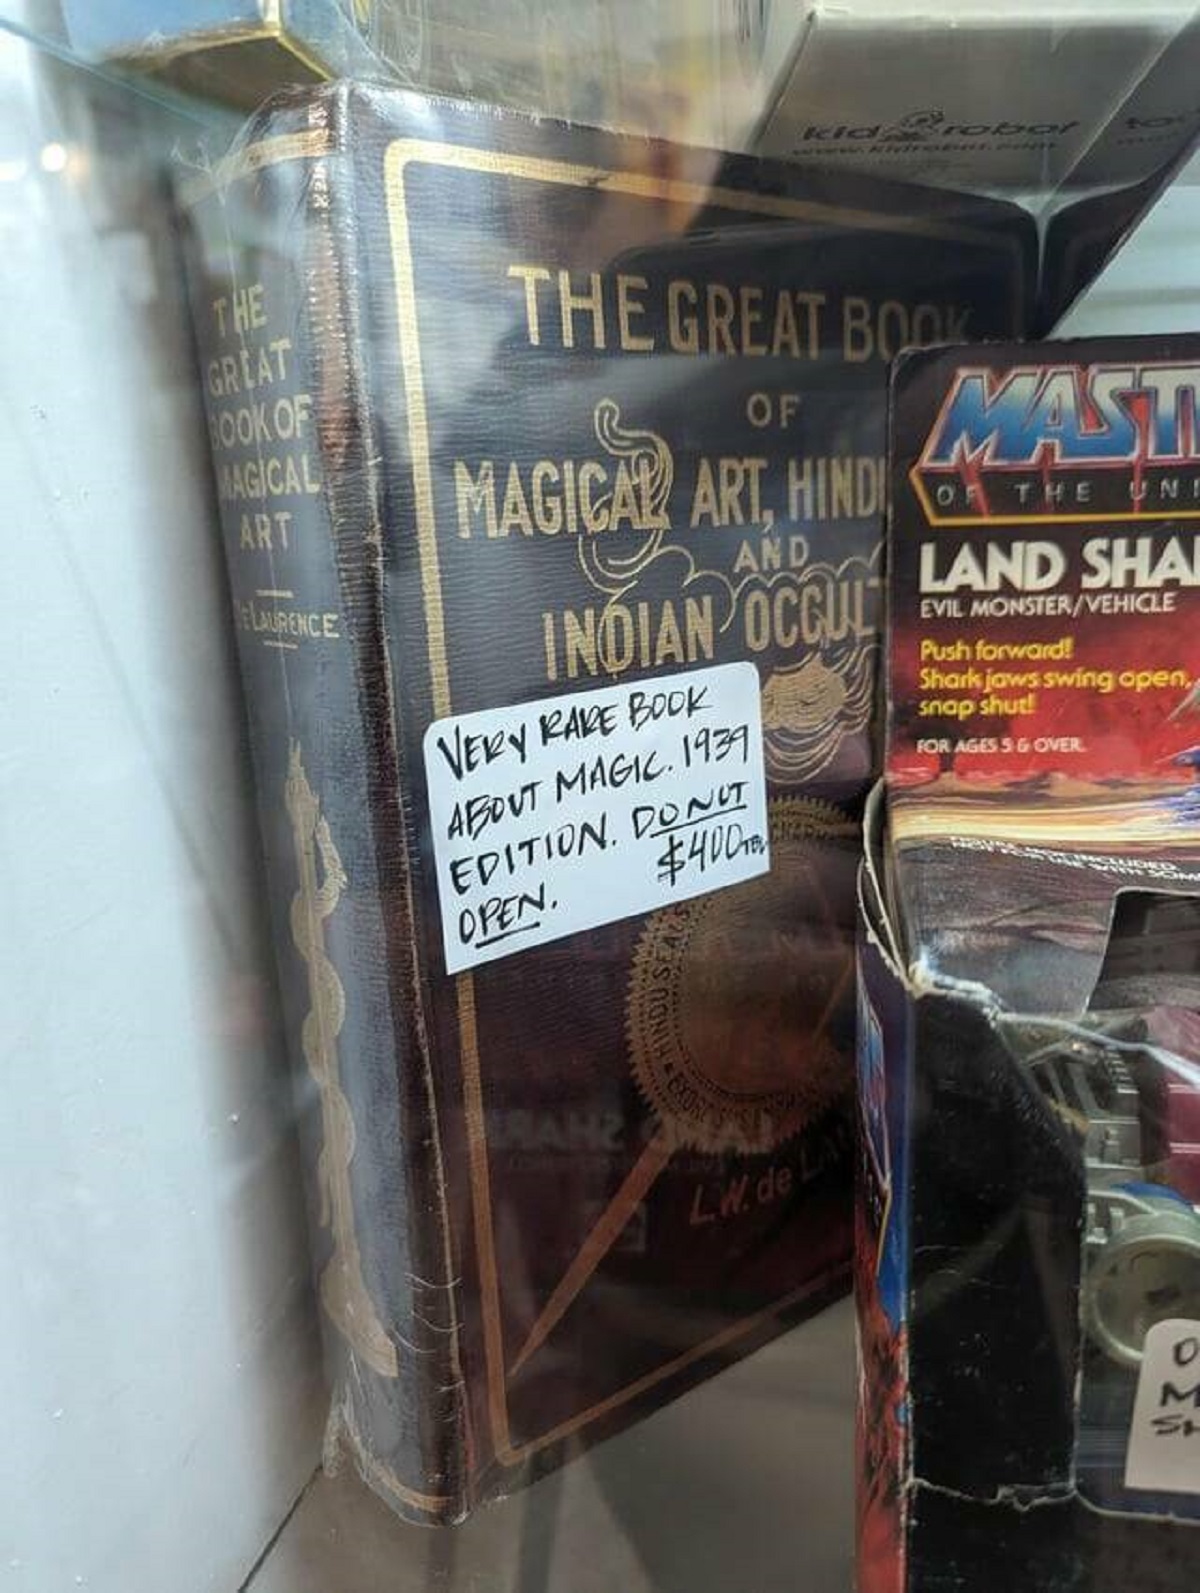 The Ook Of Magical Art Lasence The Great Book Of Mast Magical Art, Hindi, The One Of And Indian Occul Land Shai Evil MonsterVehicle Push forward Shark jows swing open snop shut For Agess & Over Very Rave Bock About Magic. 1971 Edition Donut Open. $400m…